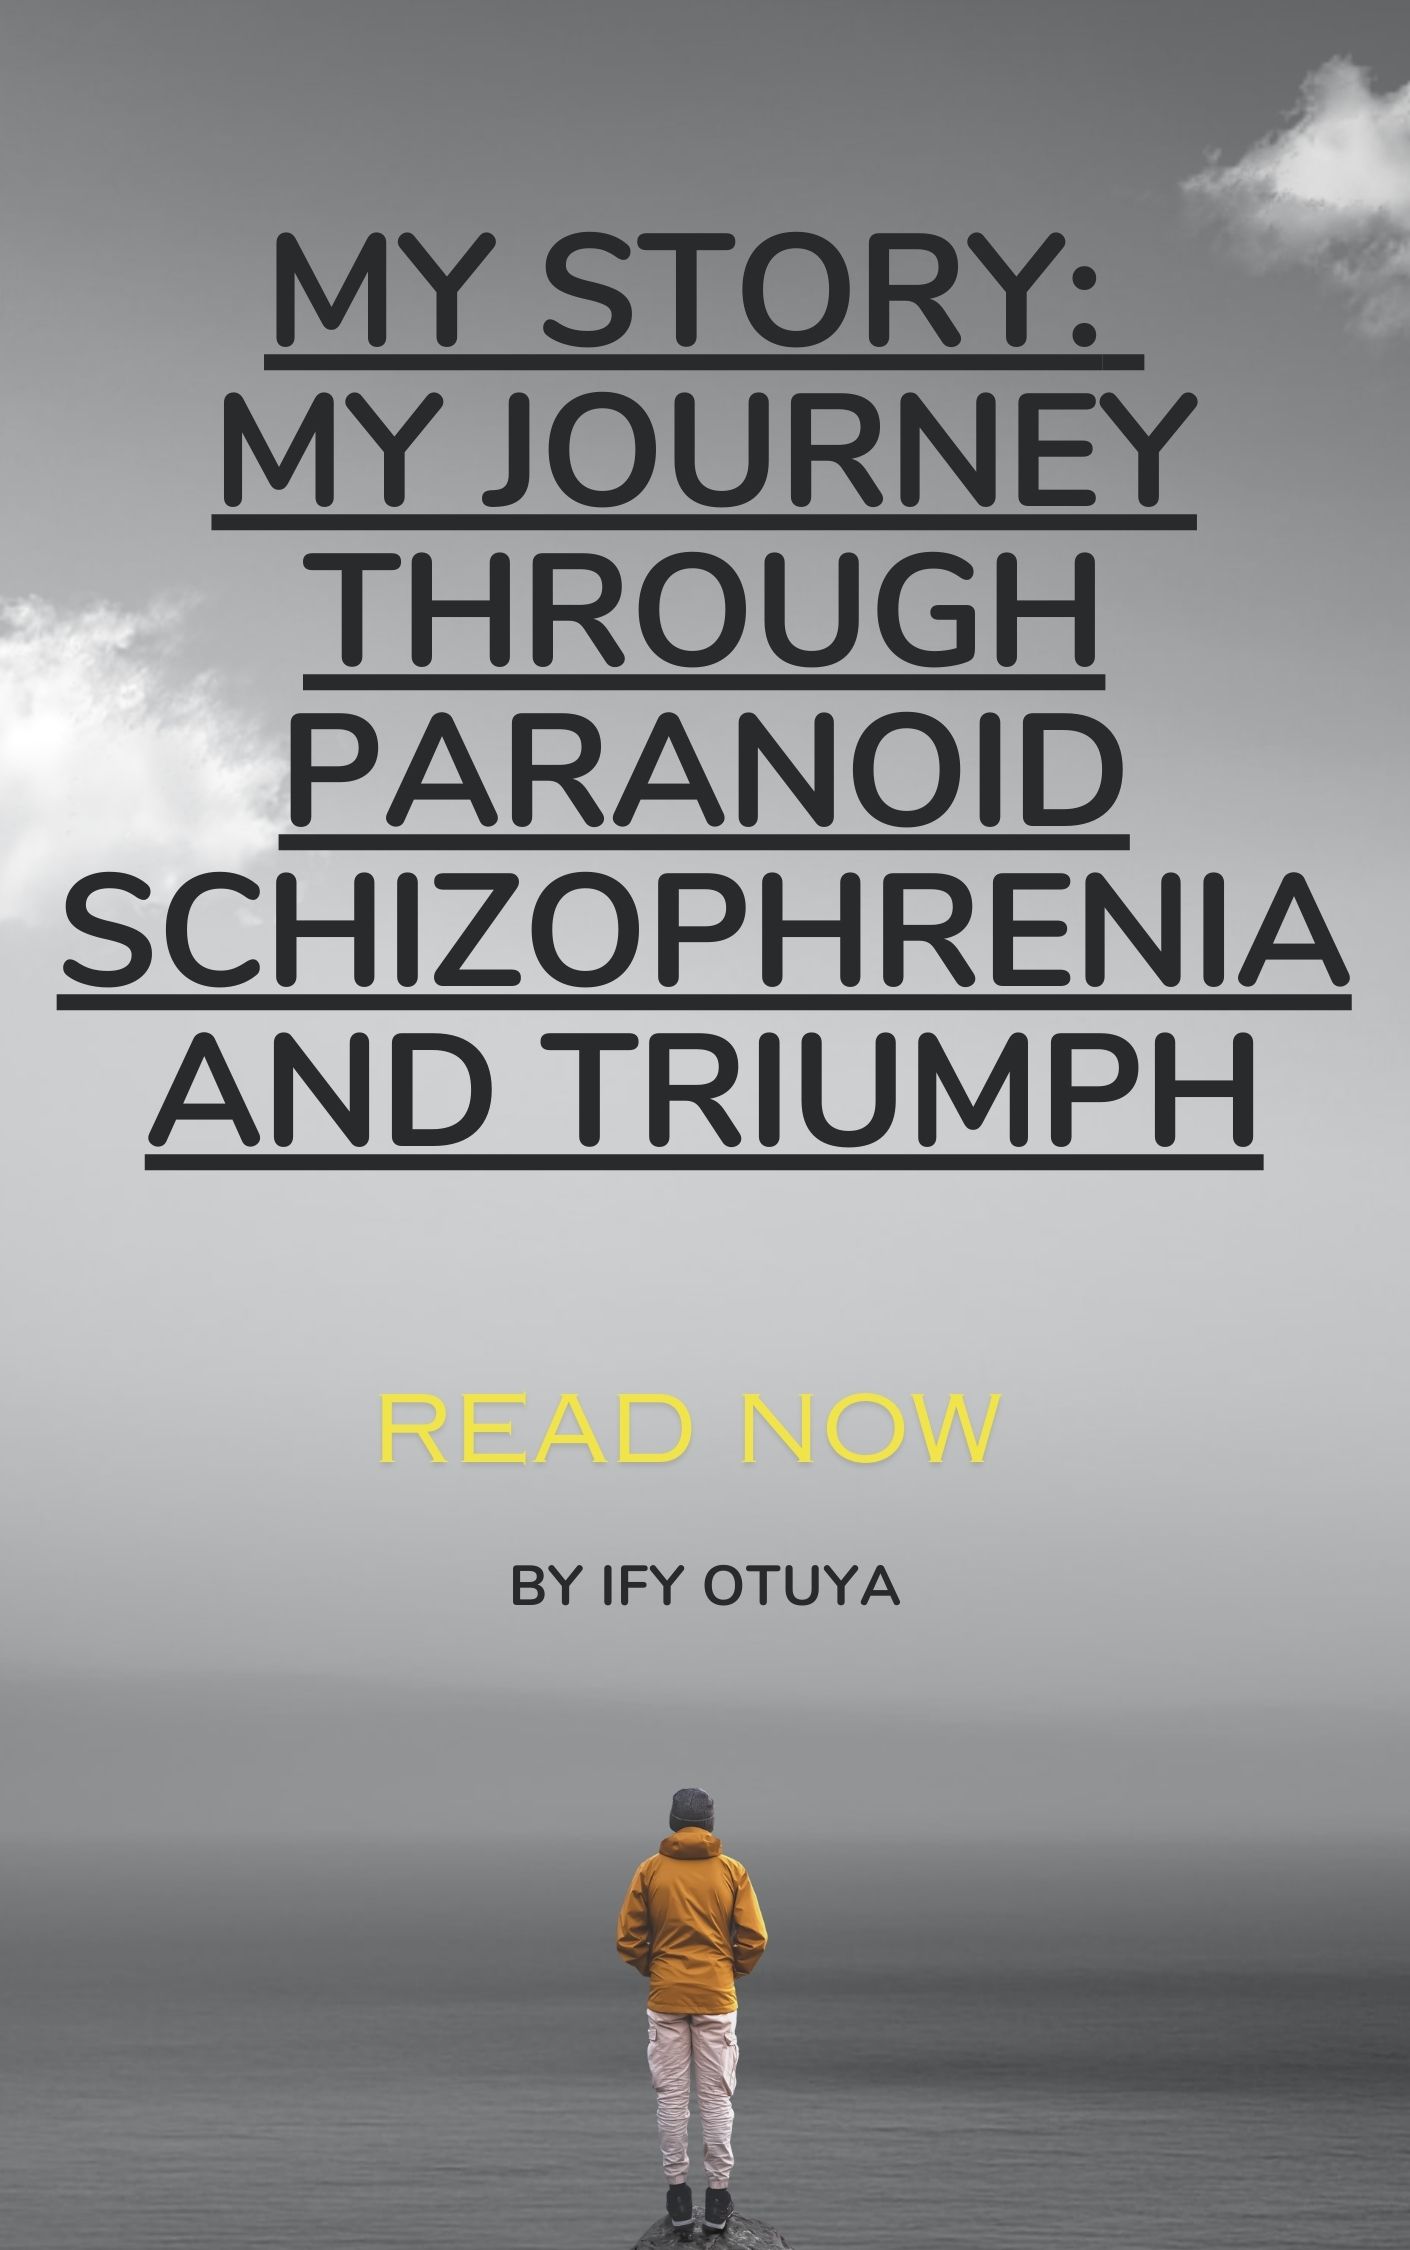 Cover artwork for My Story by Ify Otuya, for her story about her journey through paranoid schizophrenia and triumph.